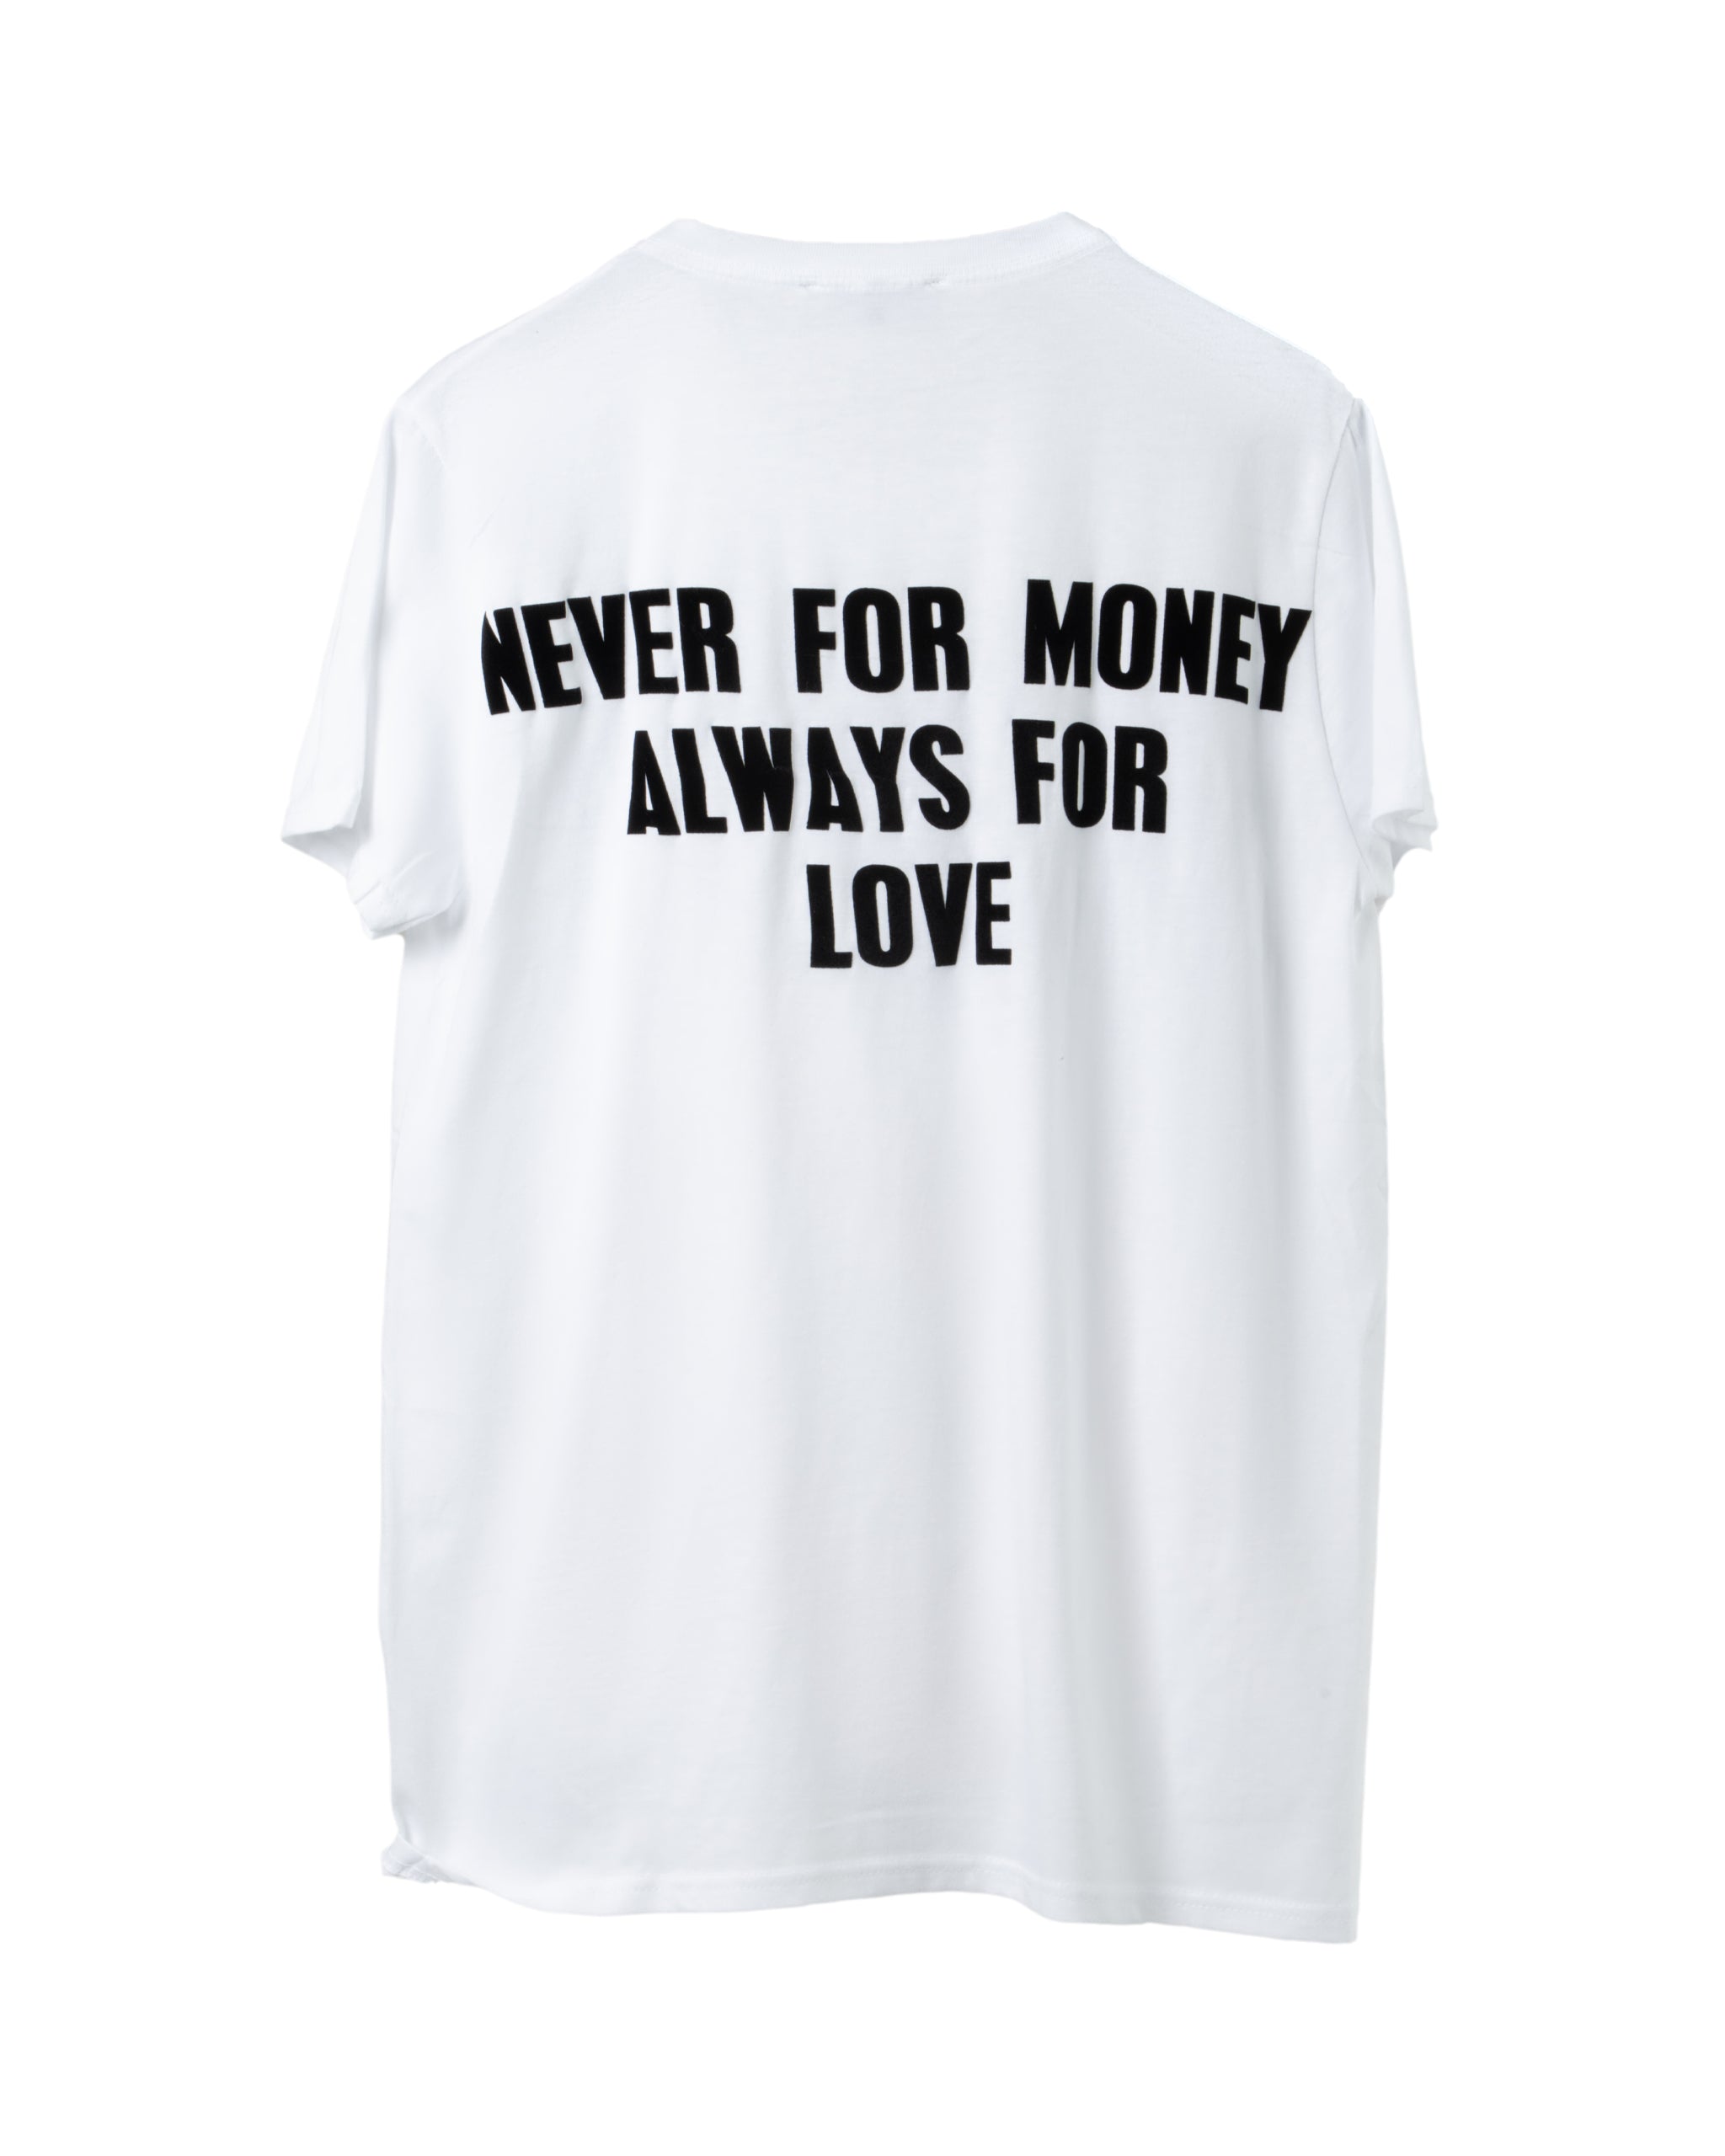 ALWAYS FOR LOVE T-SHIRT